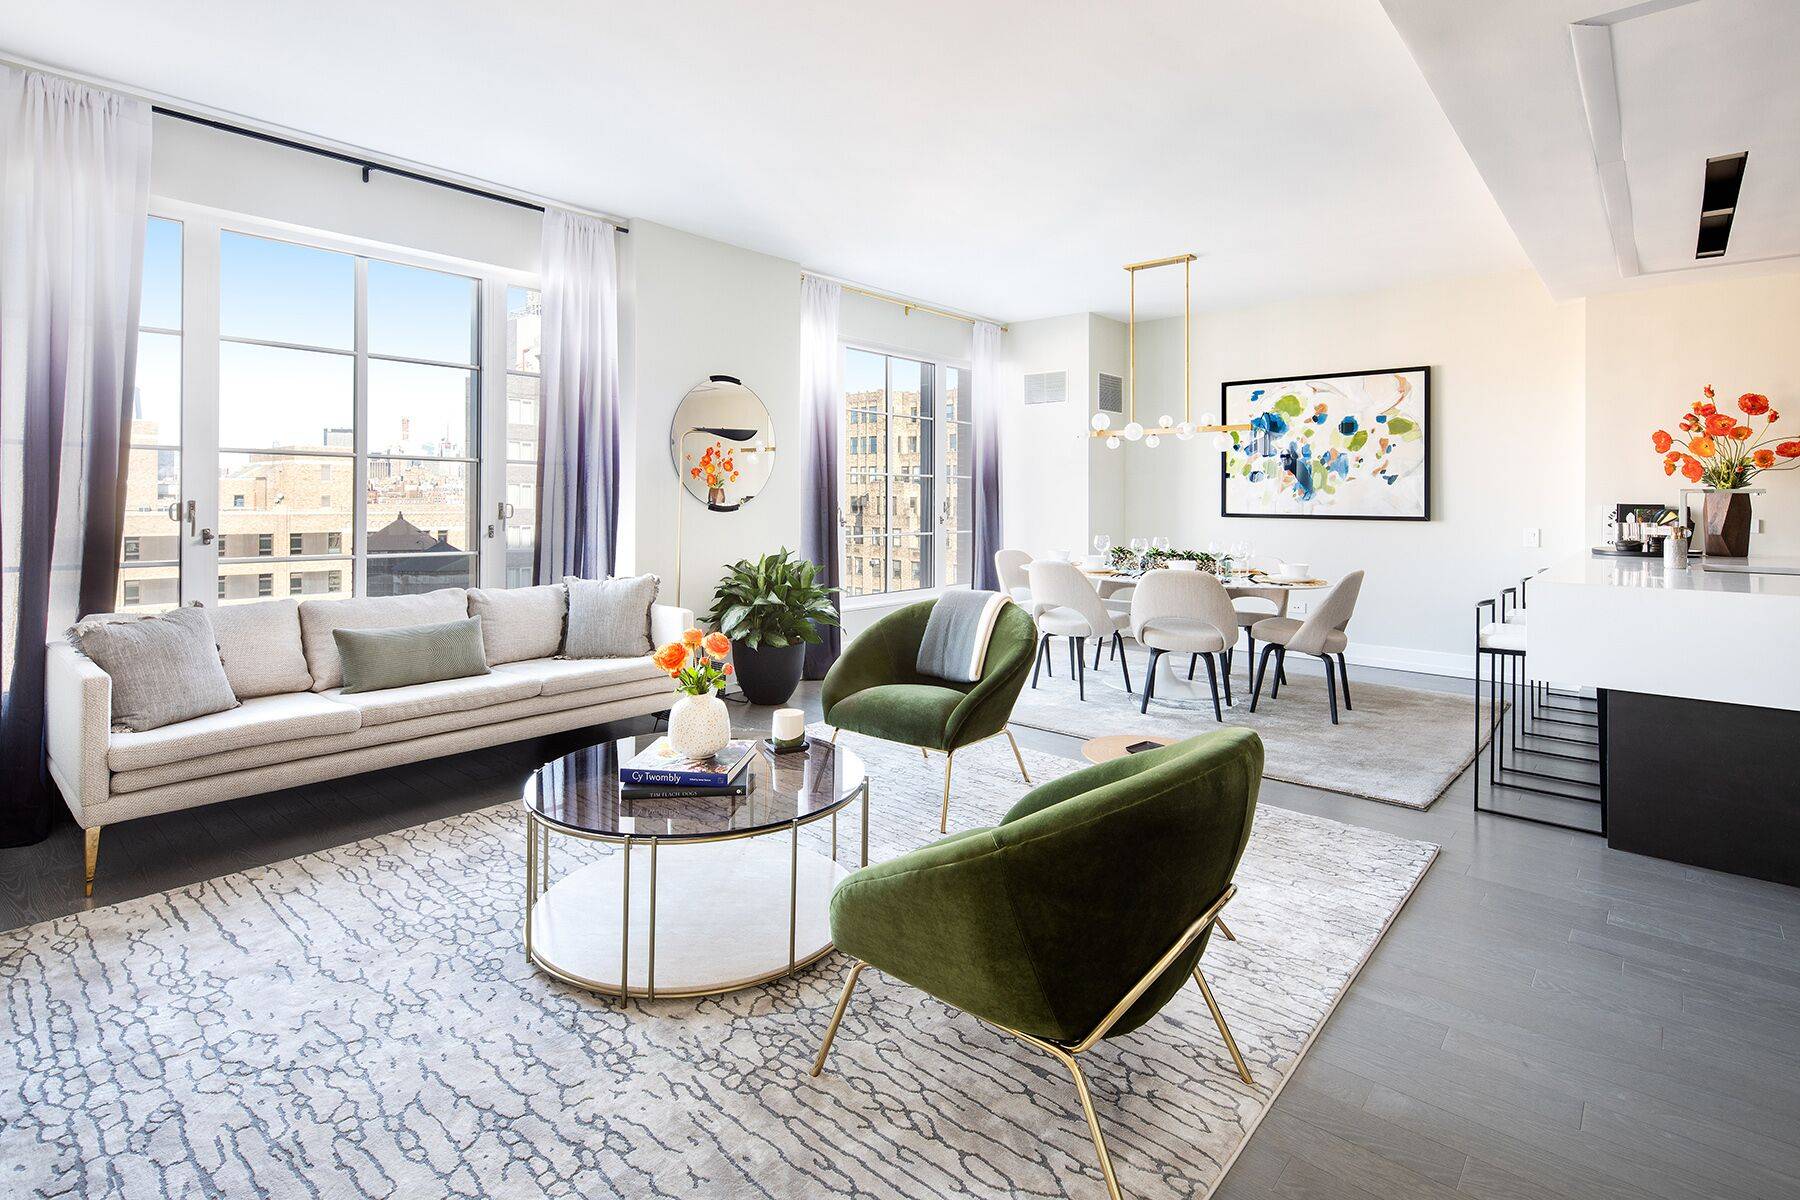 Extell Development Company presents 70 Charlton Street, a new luxury residence in West Soho.